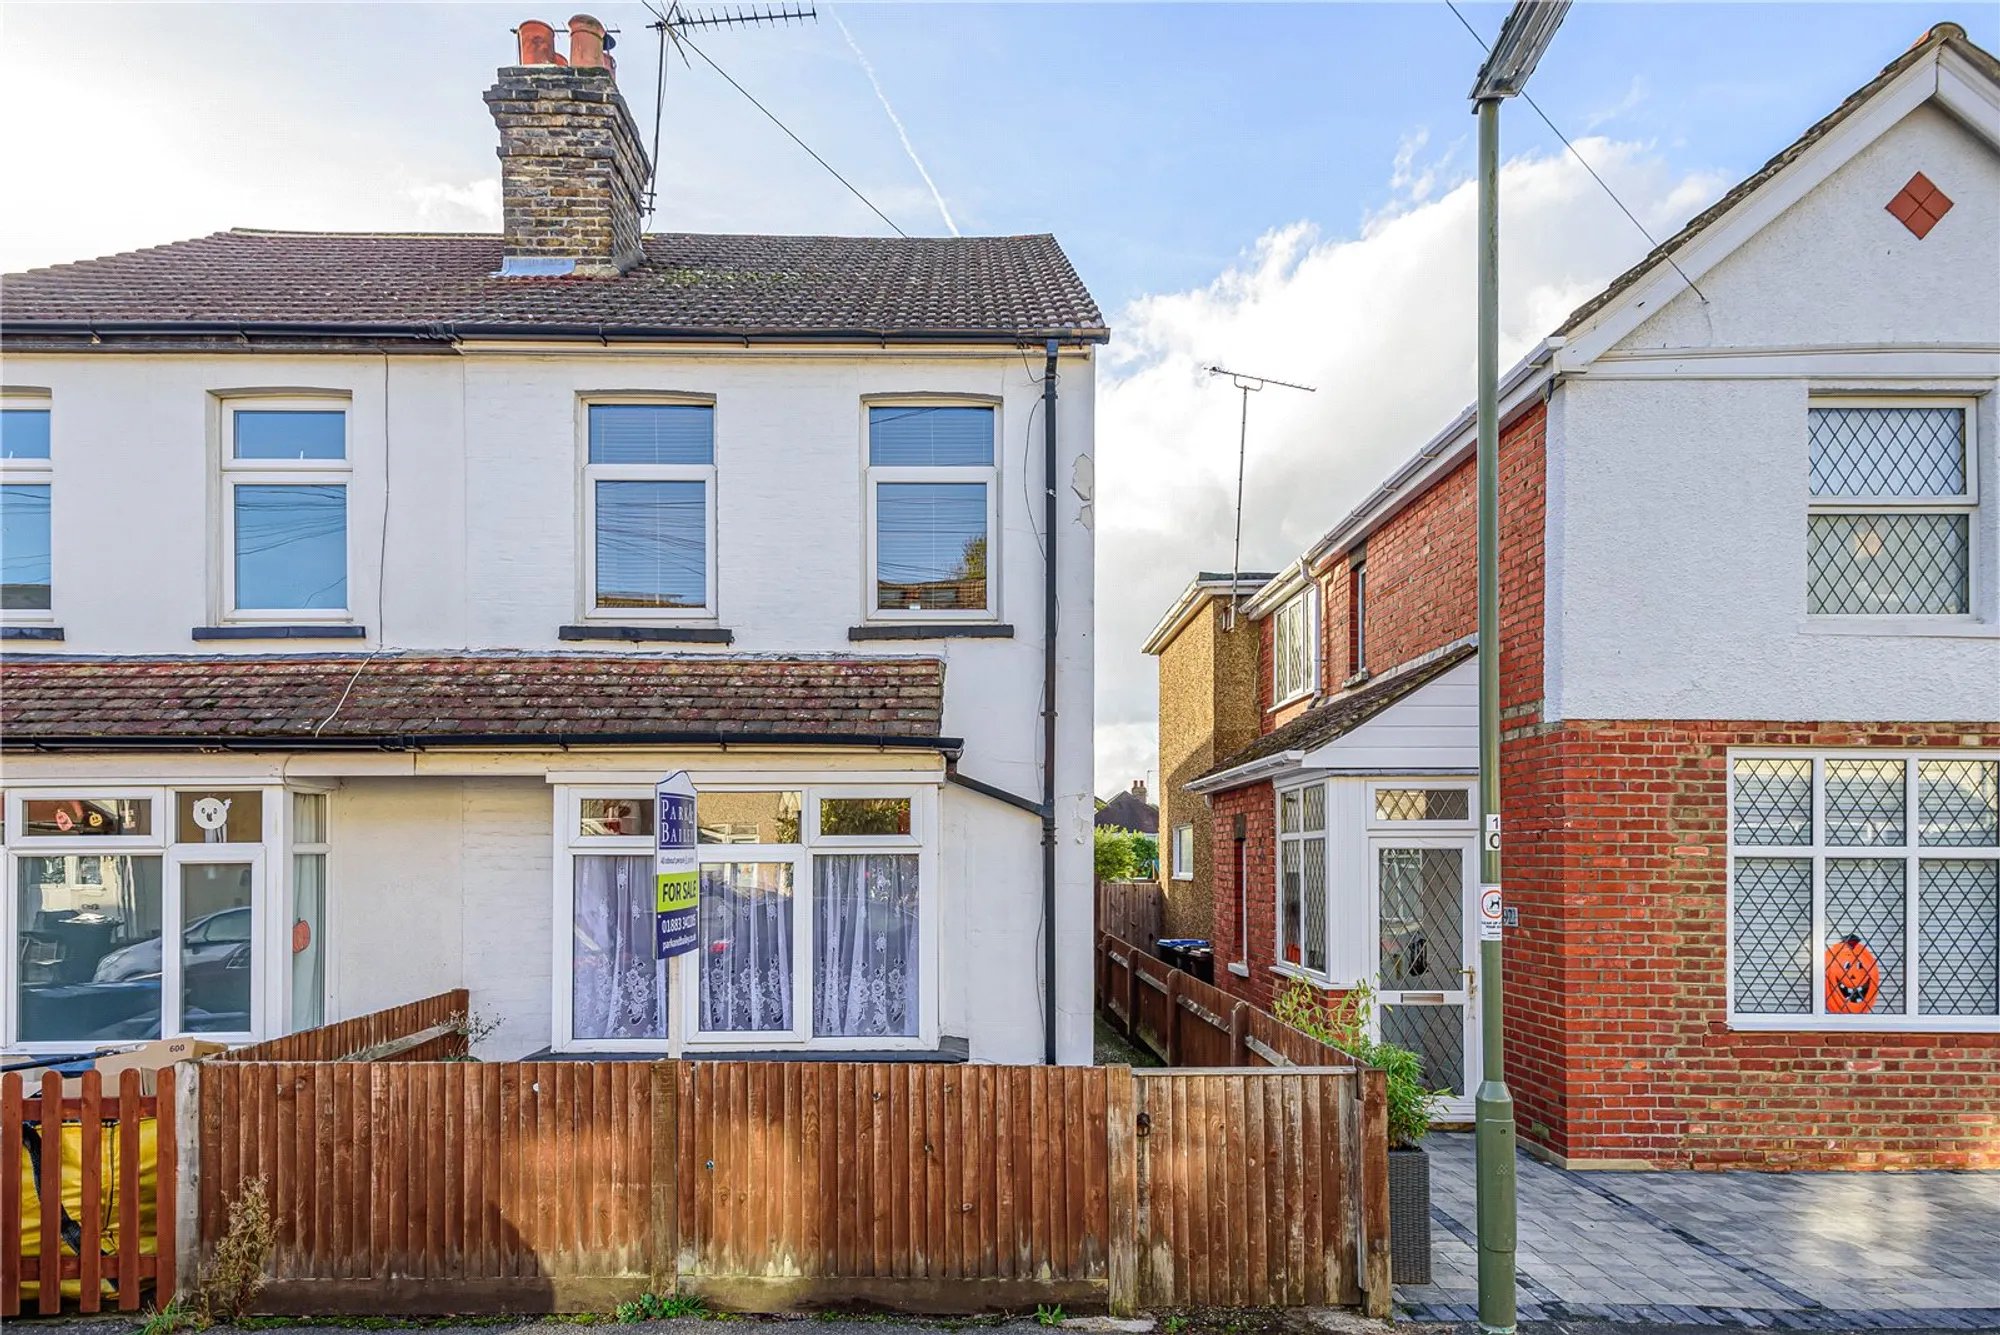 3 bed semi-detached house for sale in Addison Road, Caterham - Property Image 1